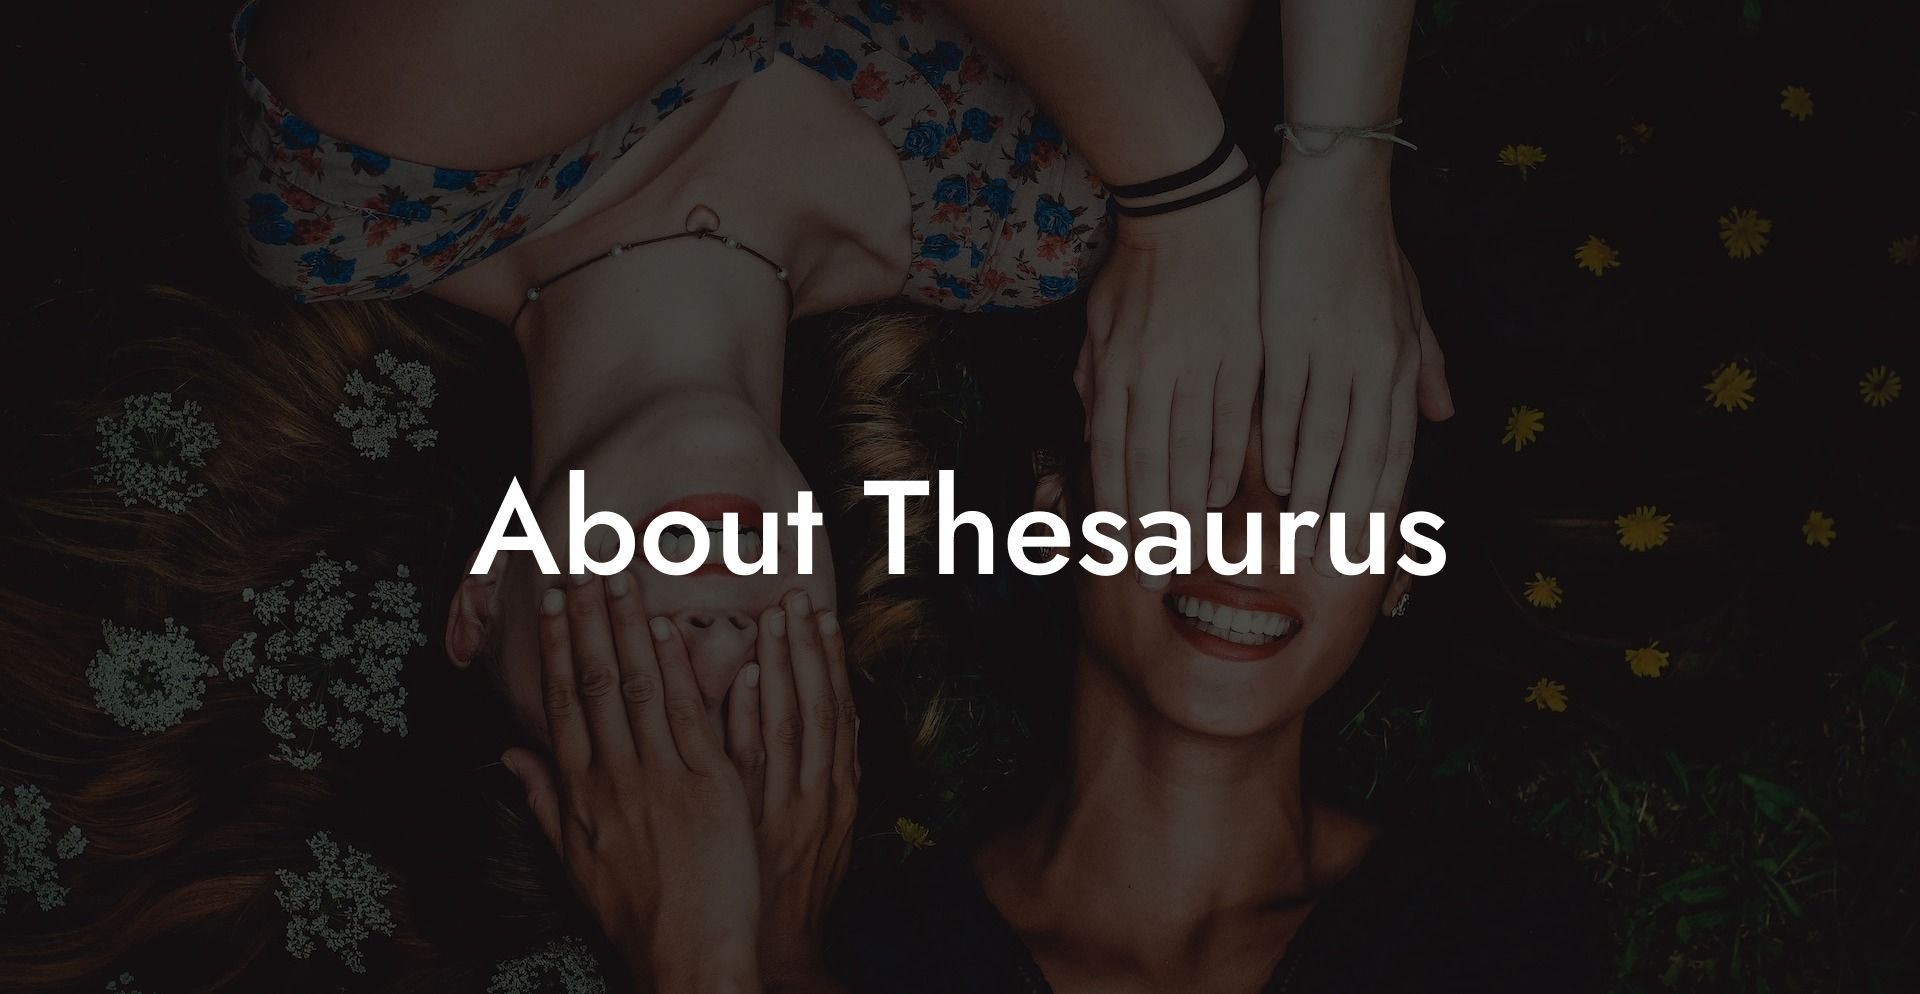 About Thesaurus